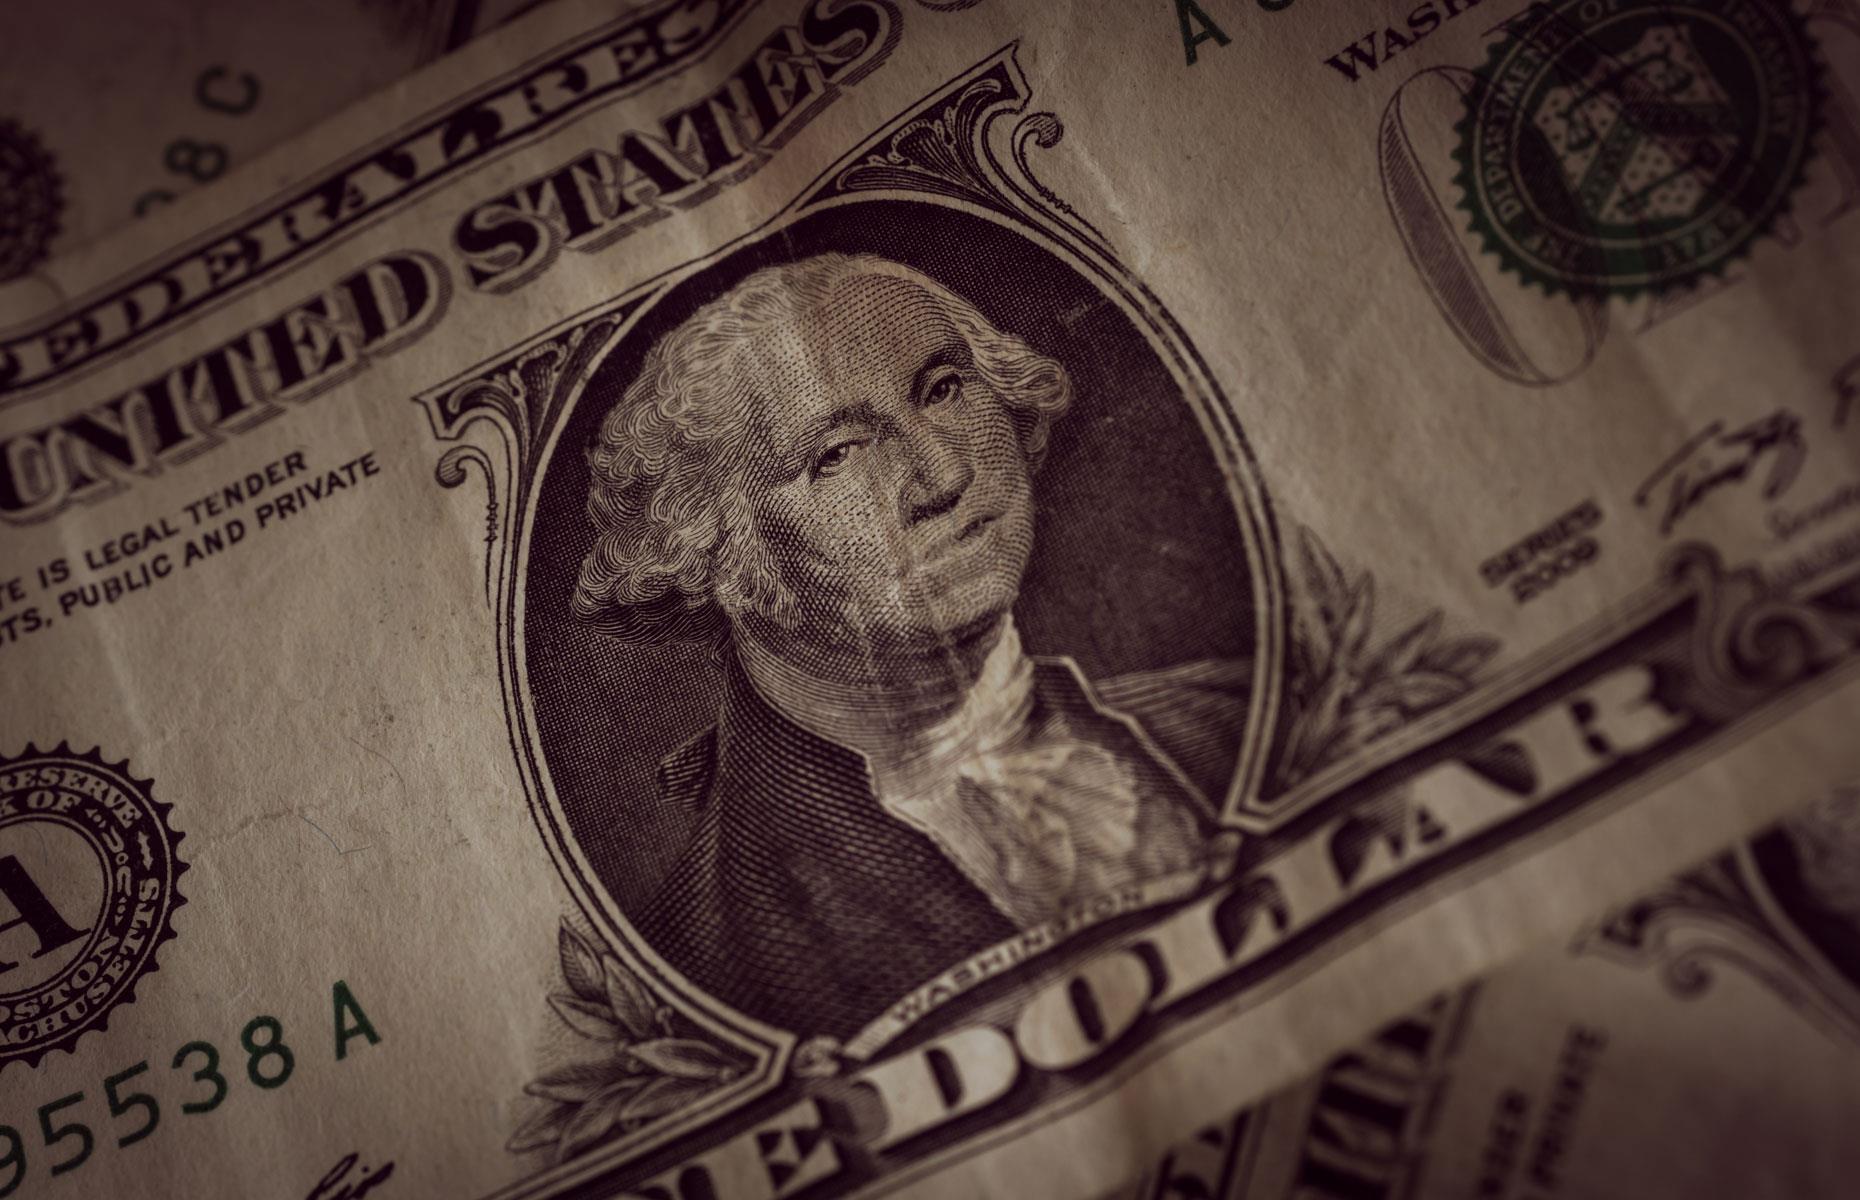 Most dollar bills are teeming with bacteria